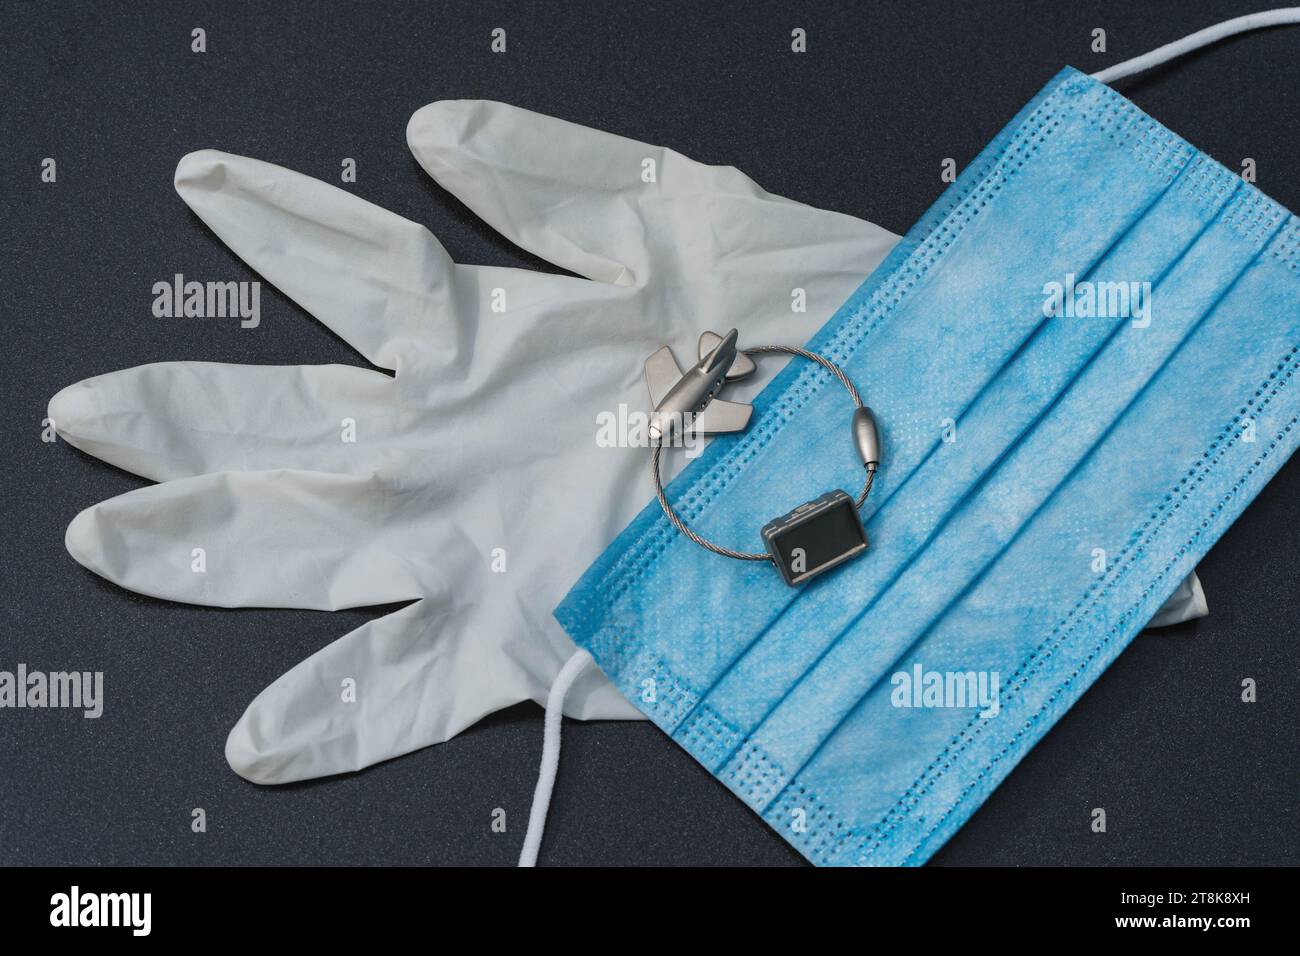 latex glove, mask, and luggage tag with plane, flight voyage under Corona conditions Stock Photo